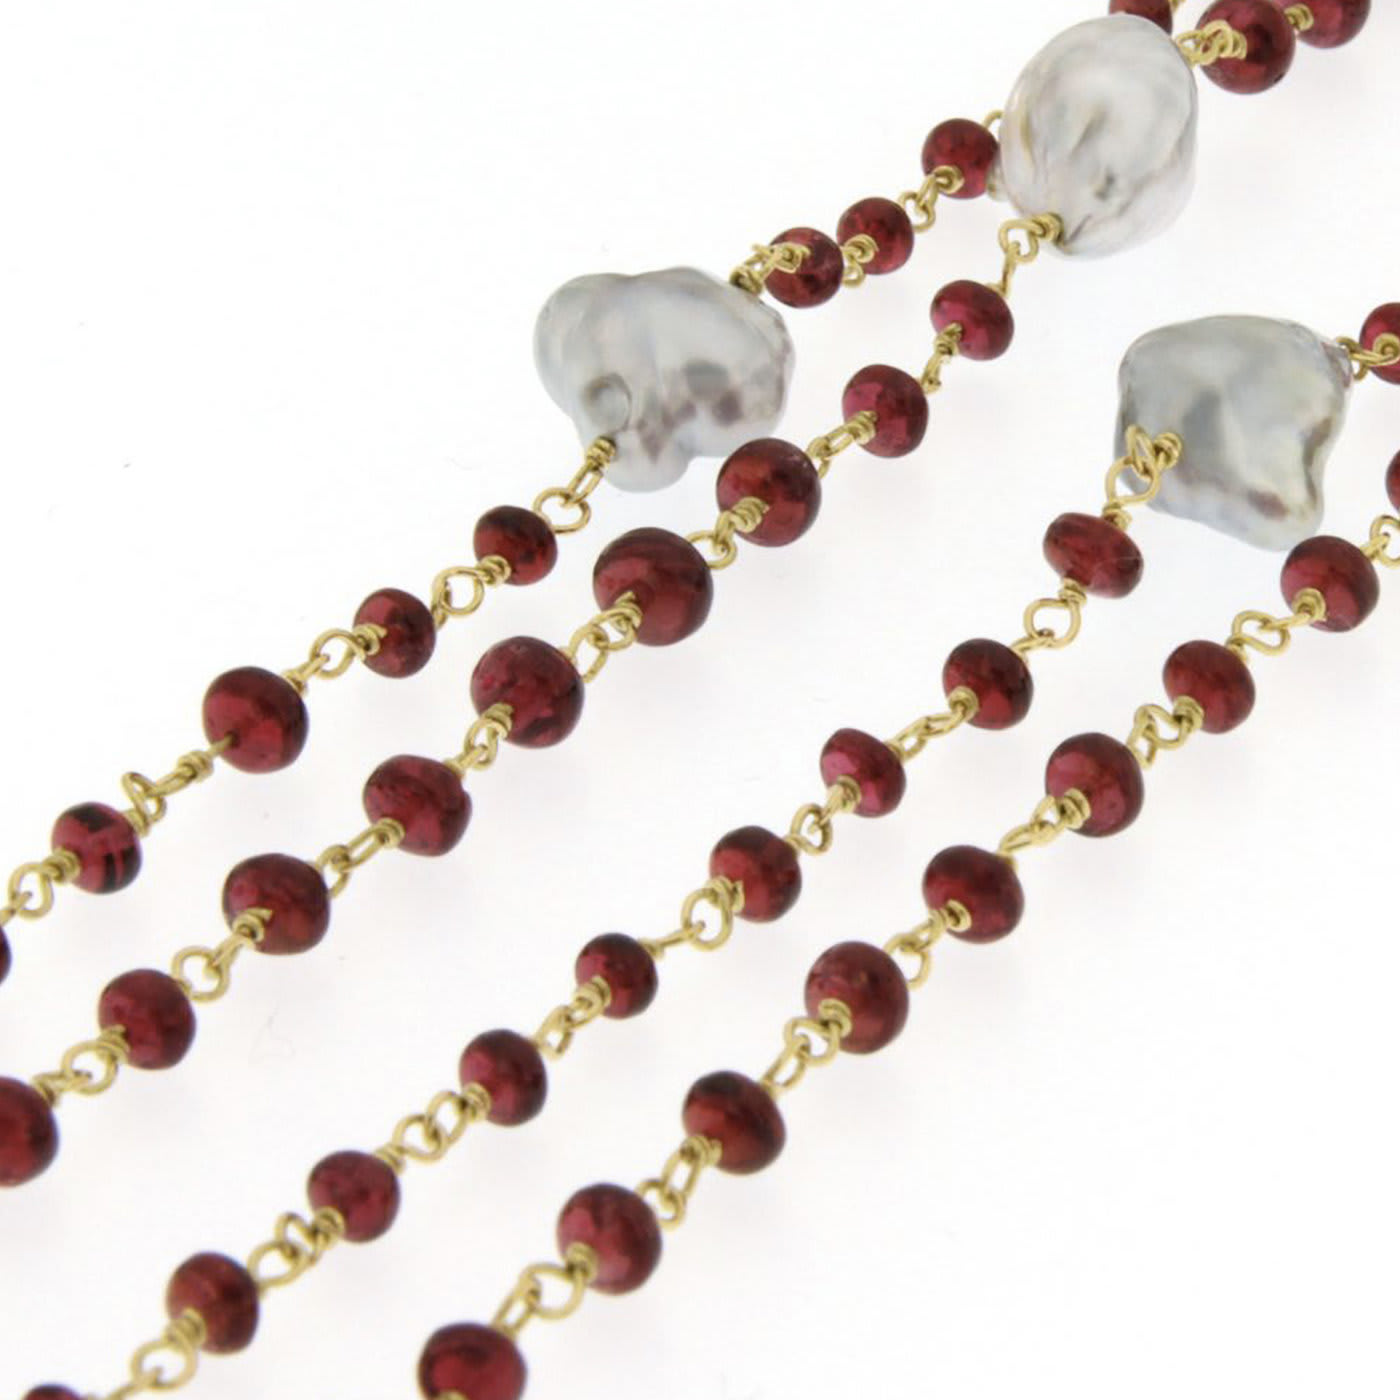 Pearls and Gold Necklace - Jona